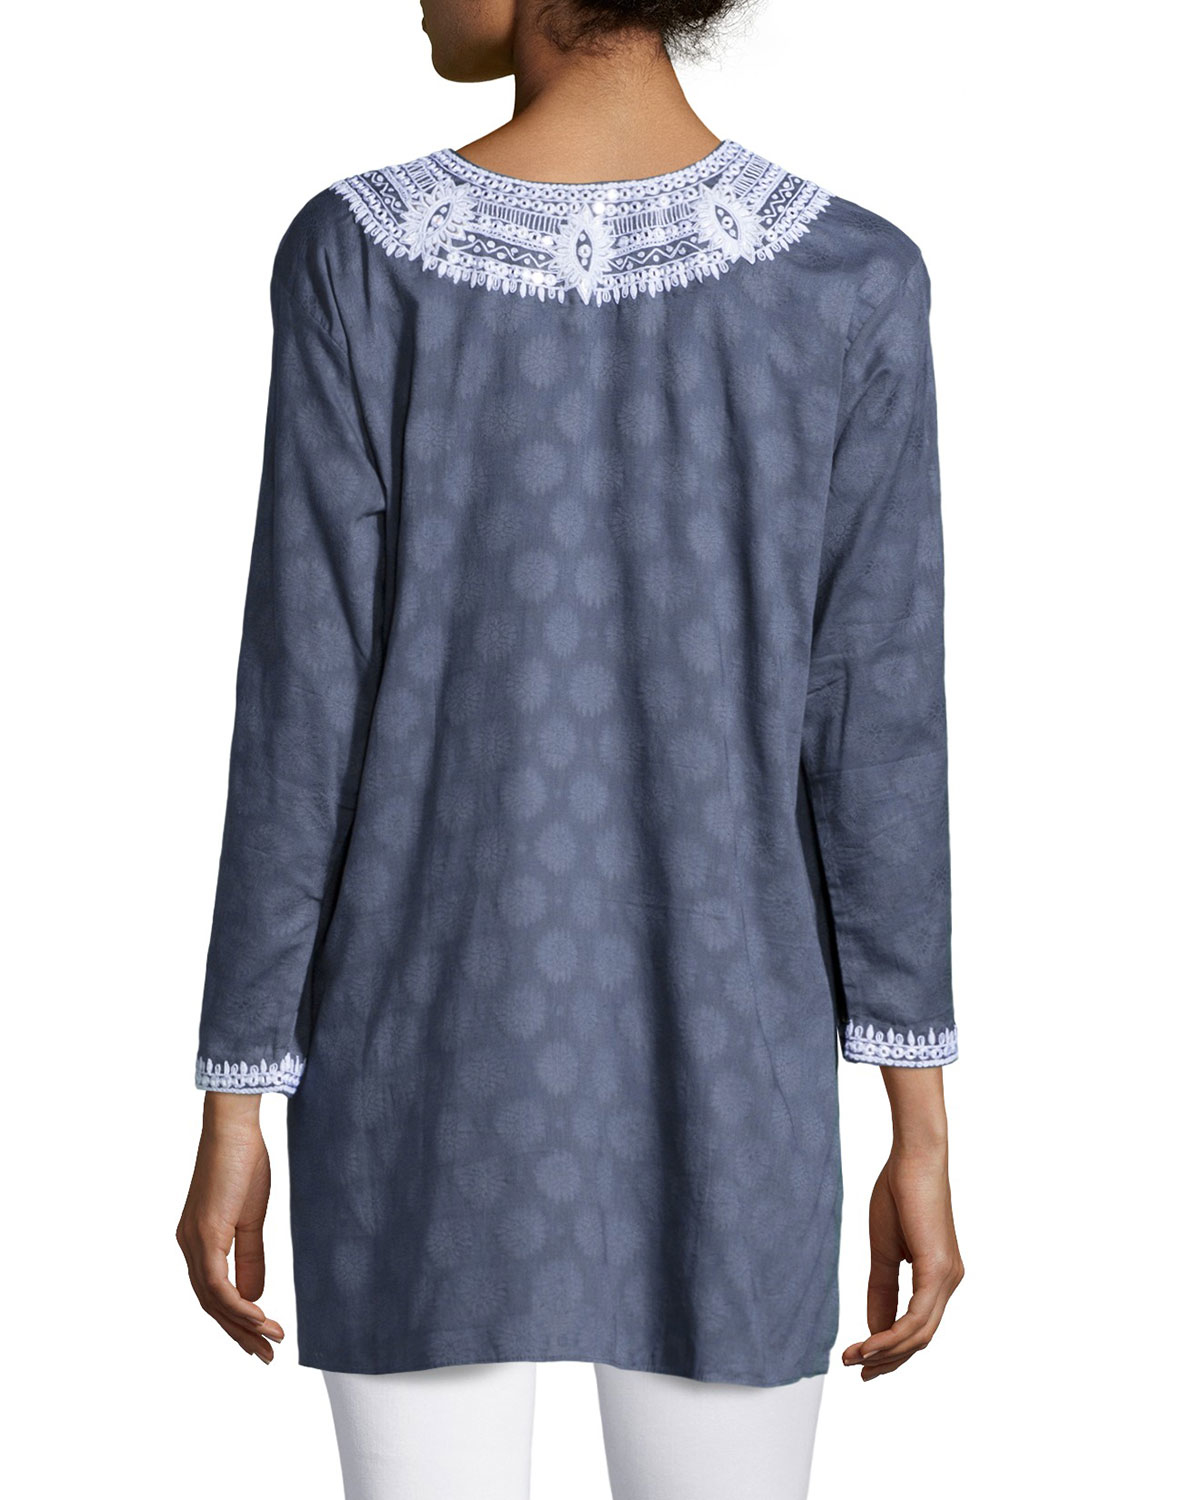 Lyst - Sulu Collection Aria Embroidered Cotton Tunic in Gray